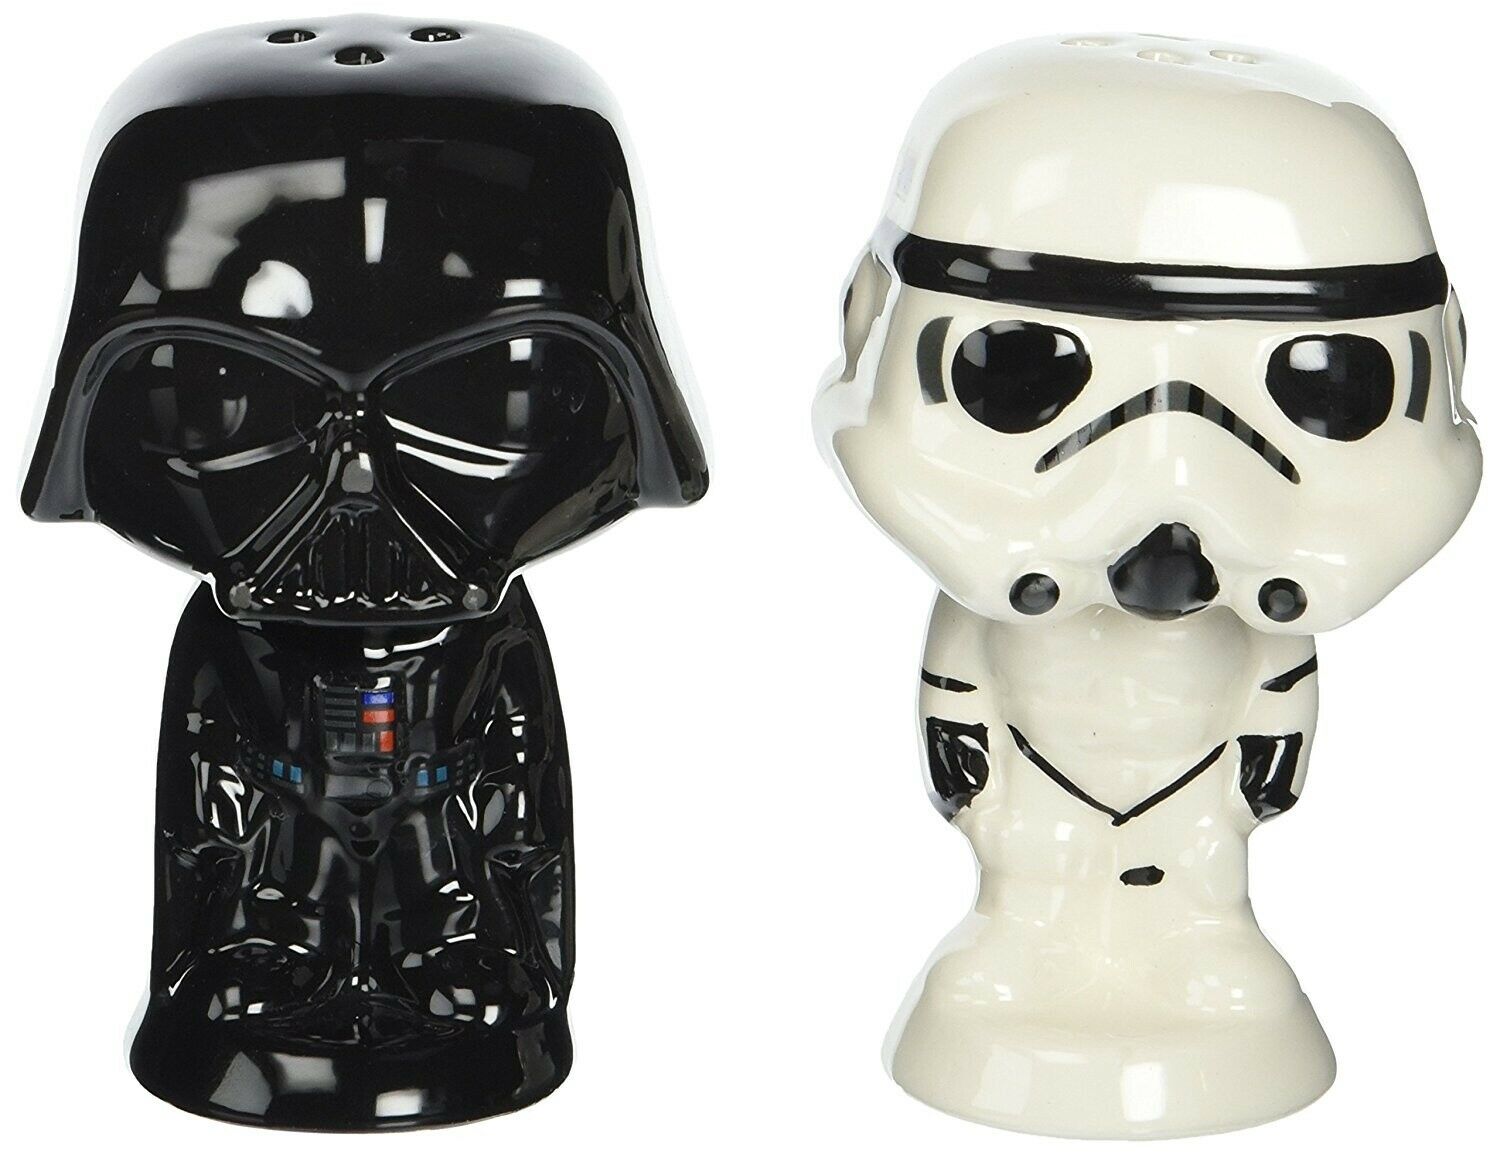 Star Wars Salt and Pepper Shakers